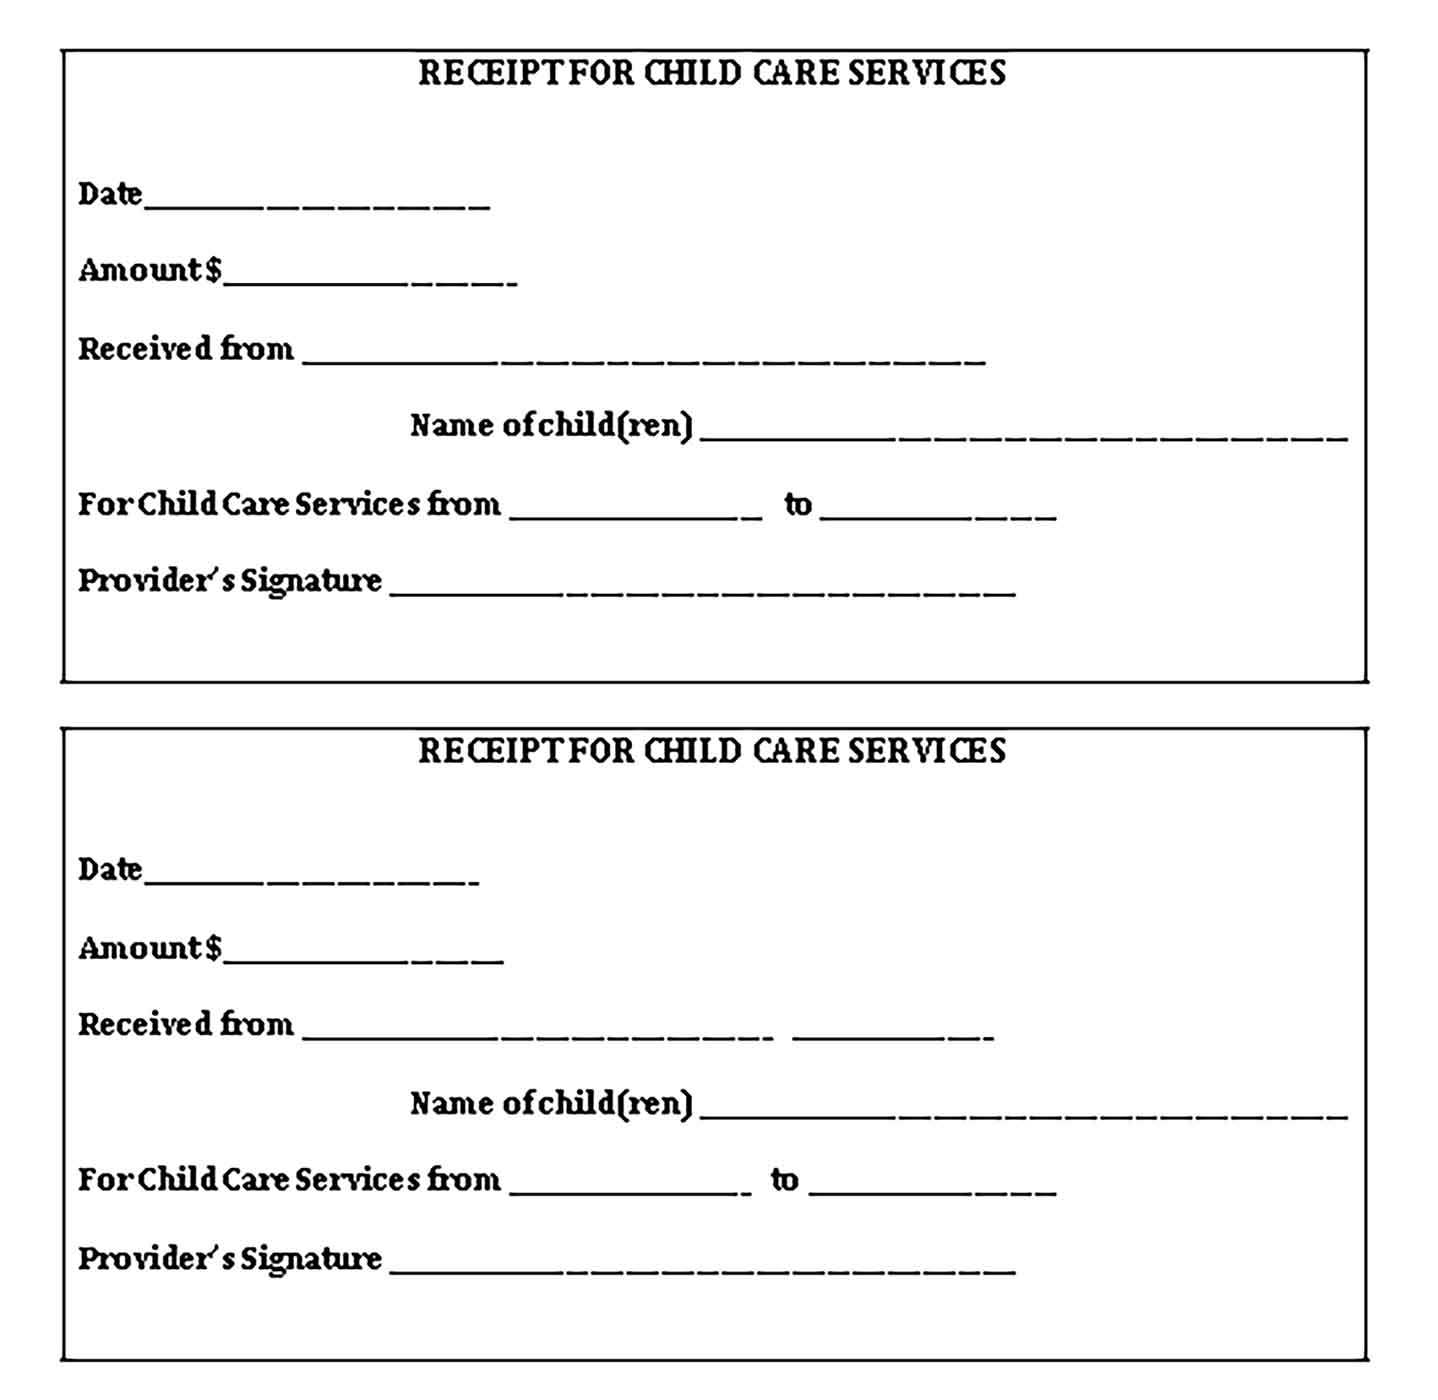 Sample Receipt For Child Care Service 1 Templates